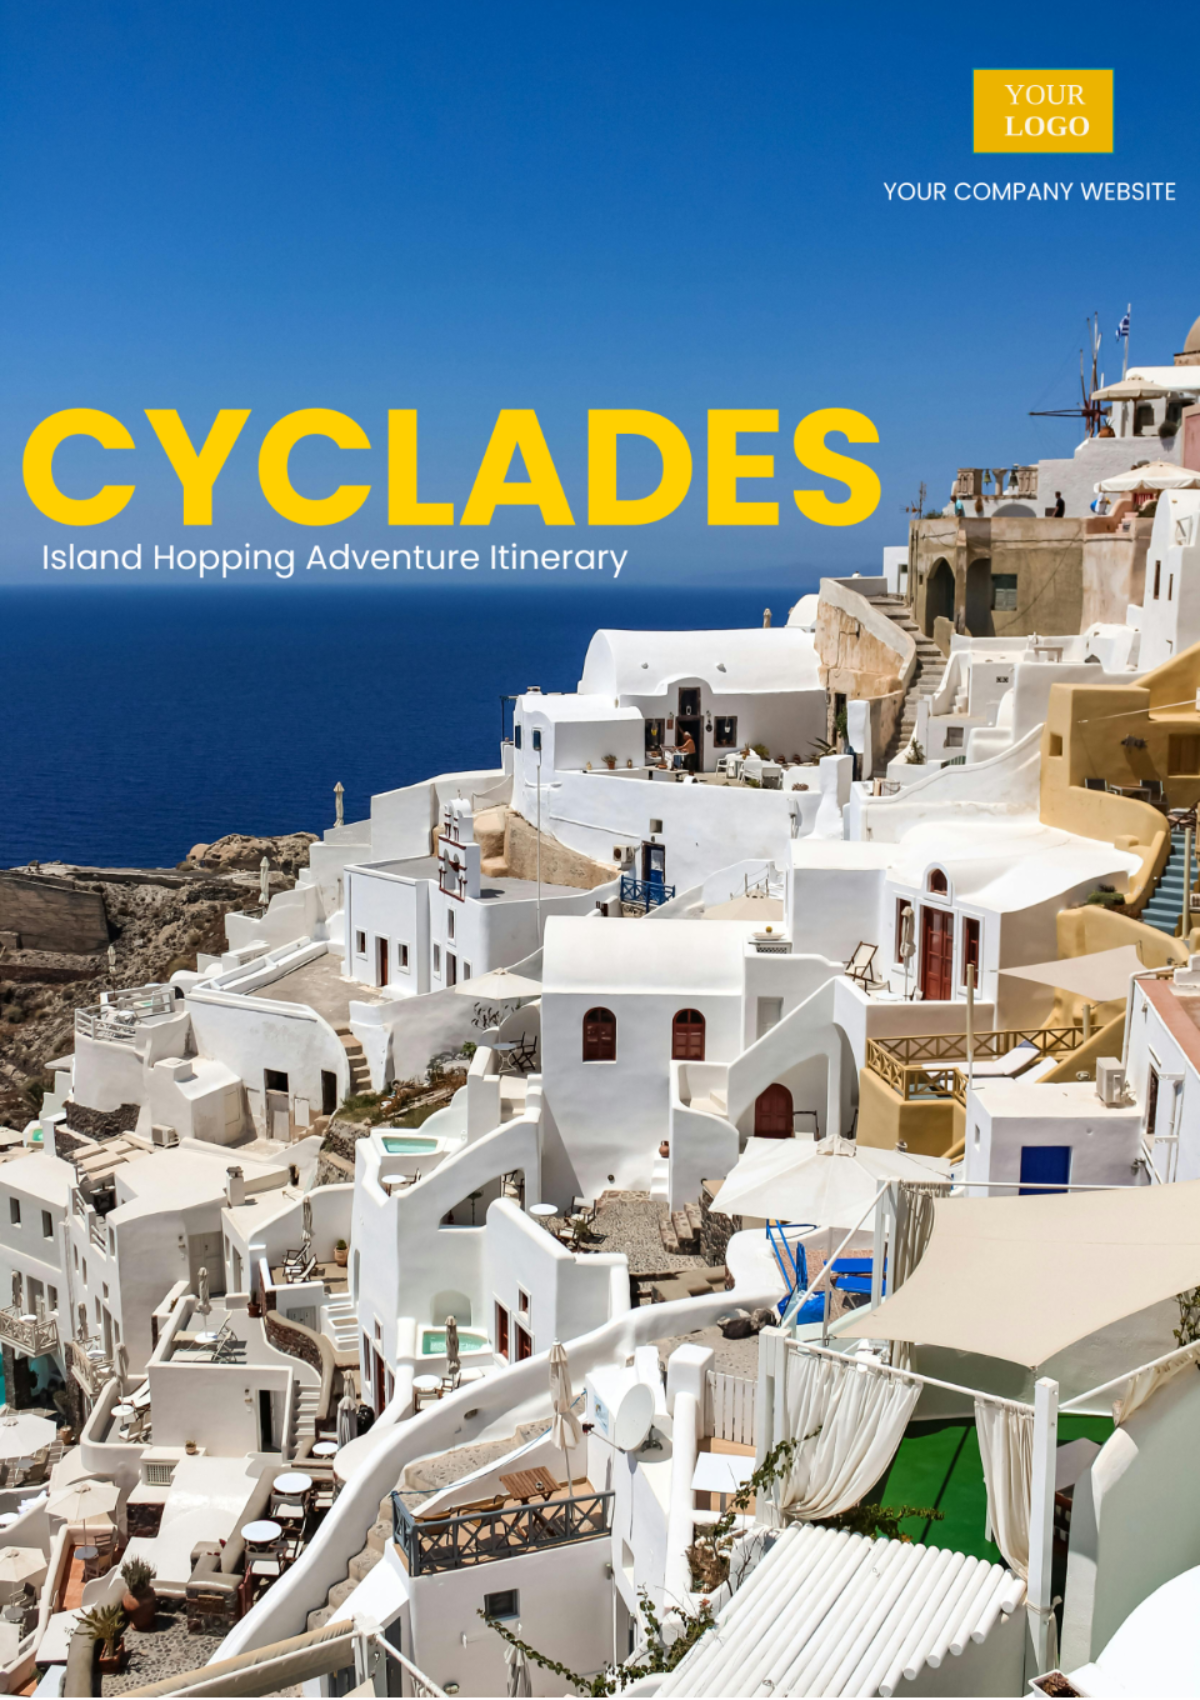 Cyclades Island Hopping Itinerary Template